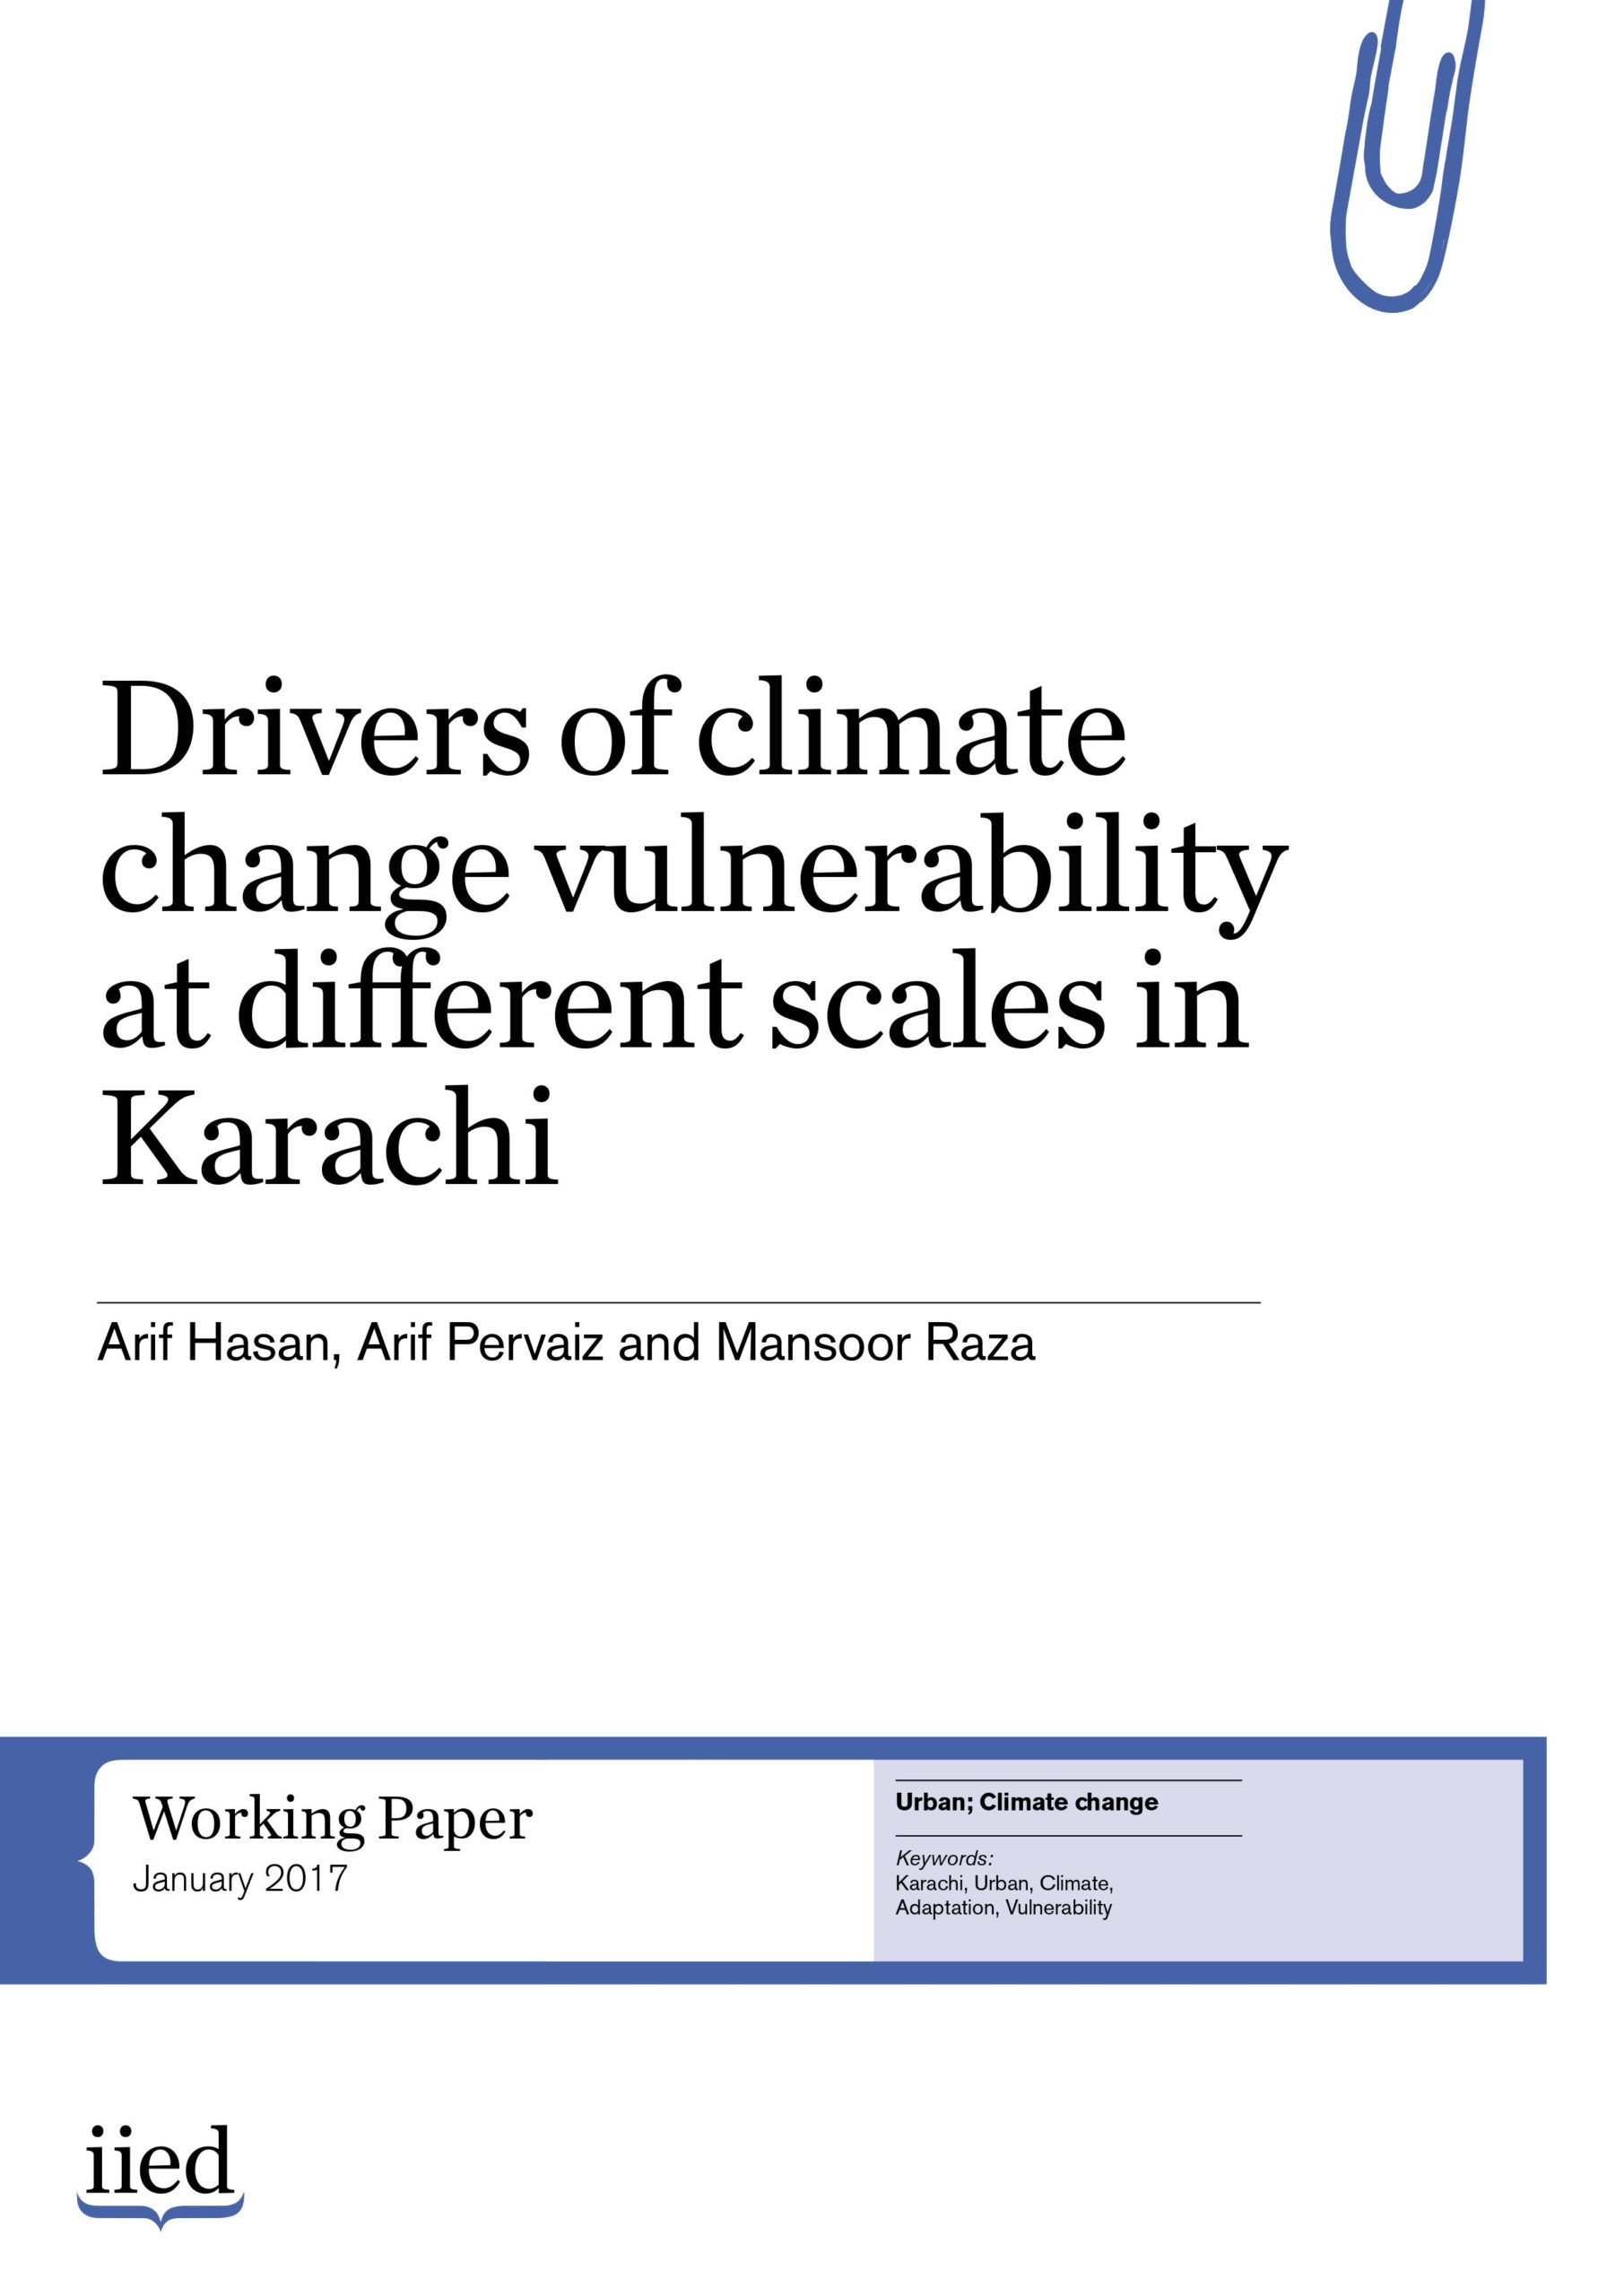 Drivers of Climate Change Vulnerability at Different Scales In Karachi